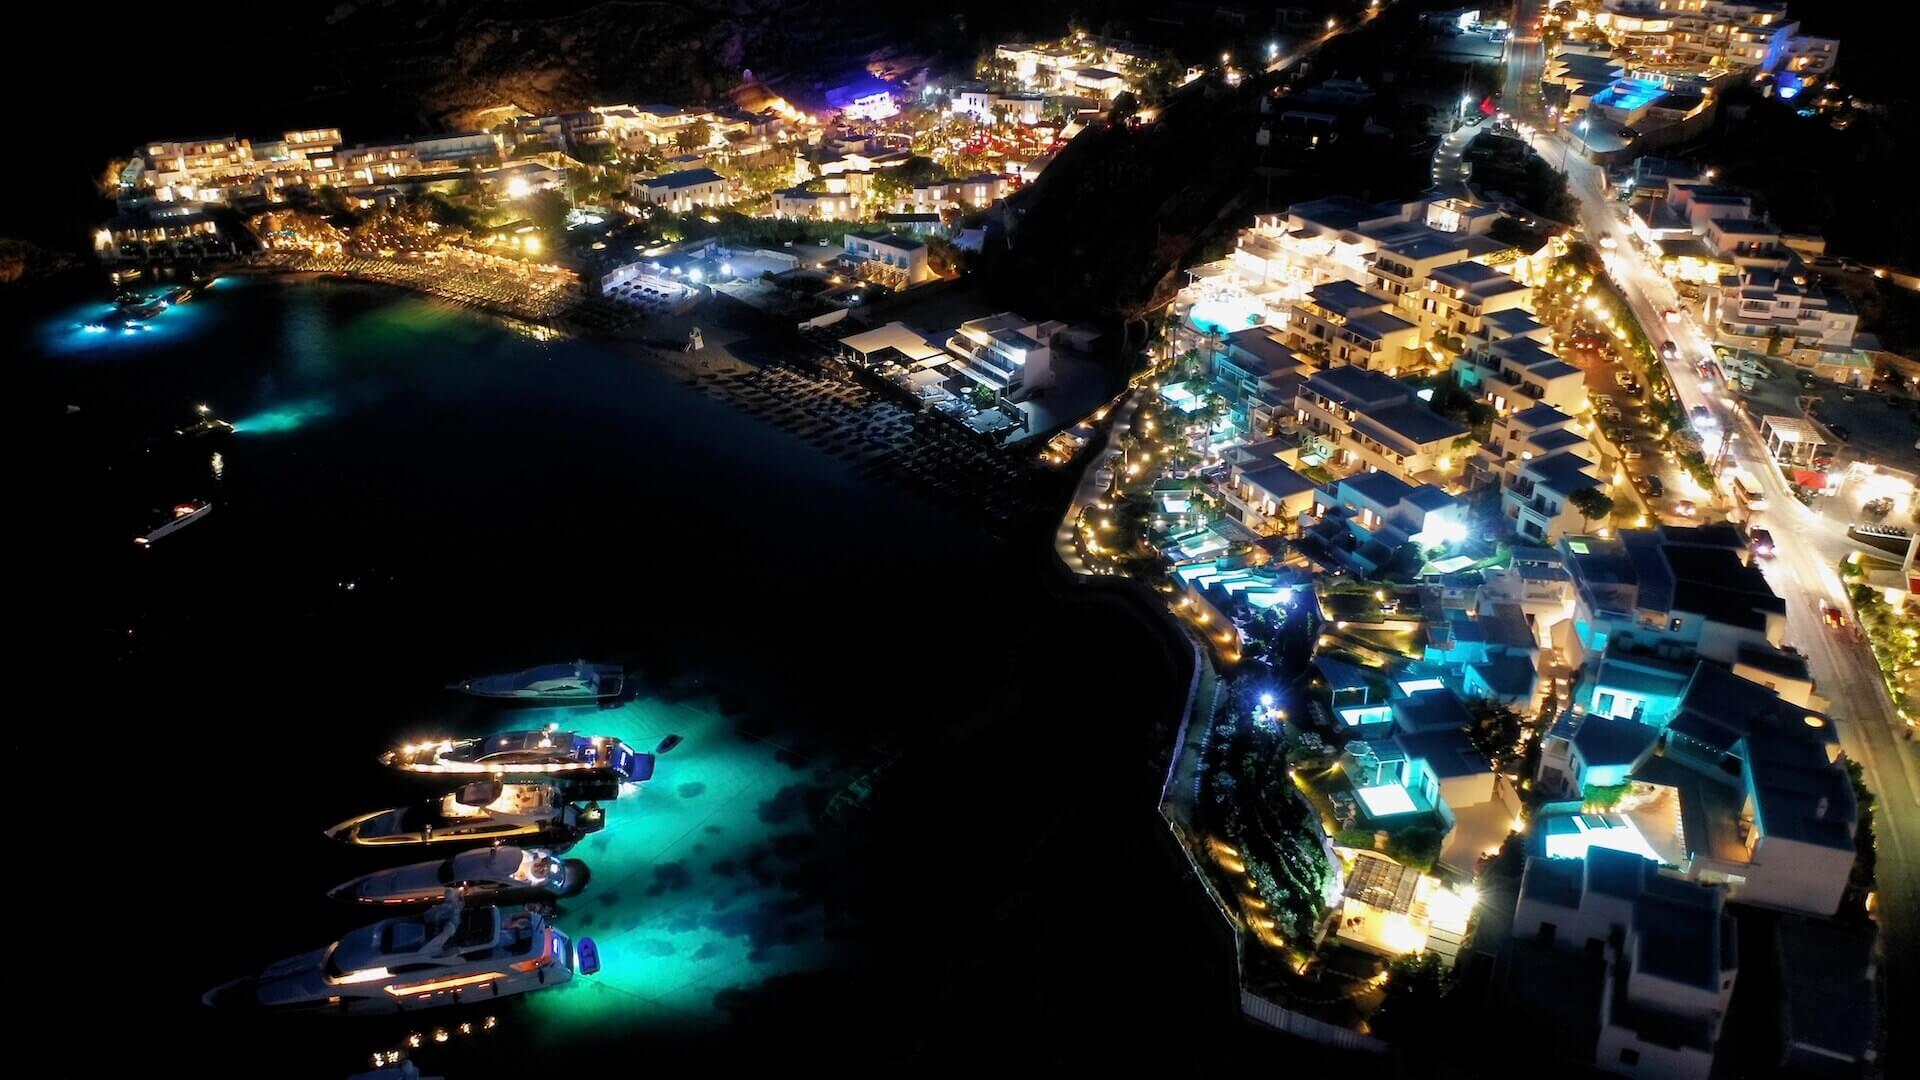 A view of the island lit up at night